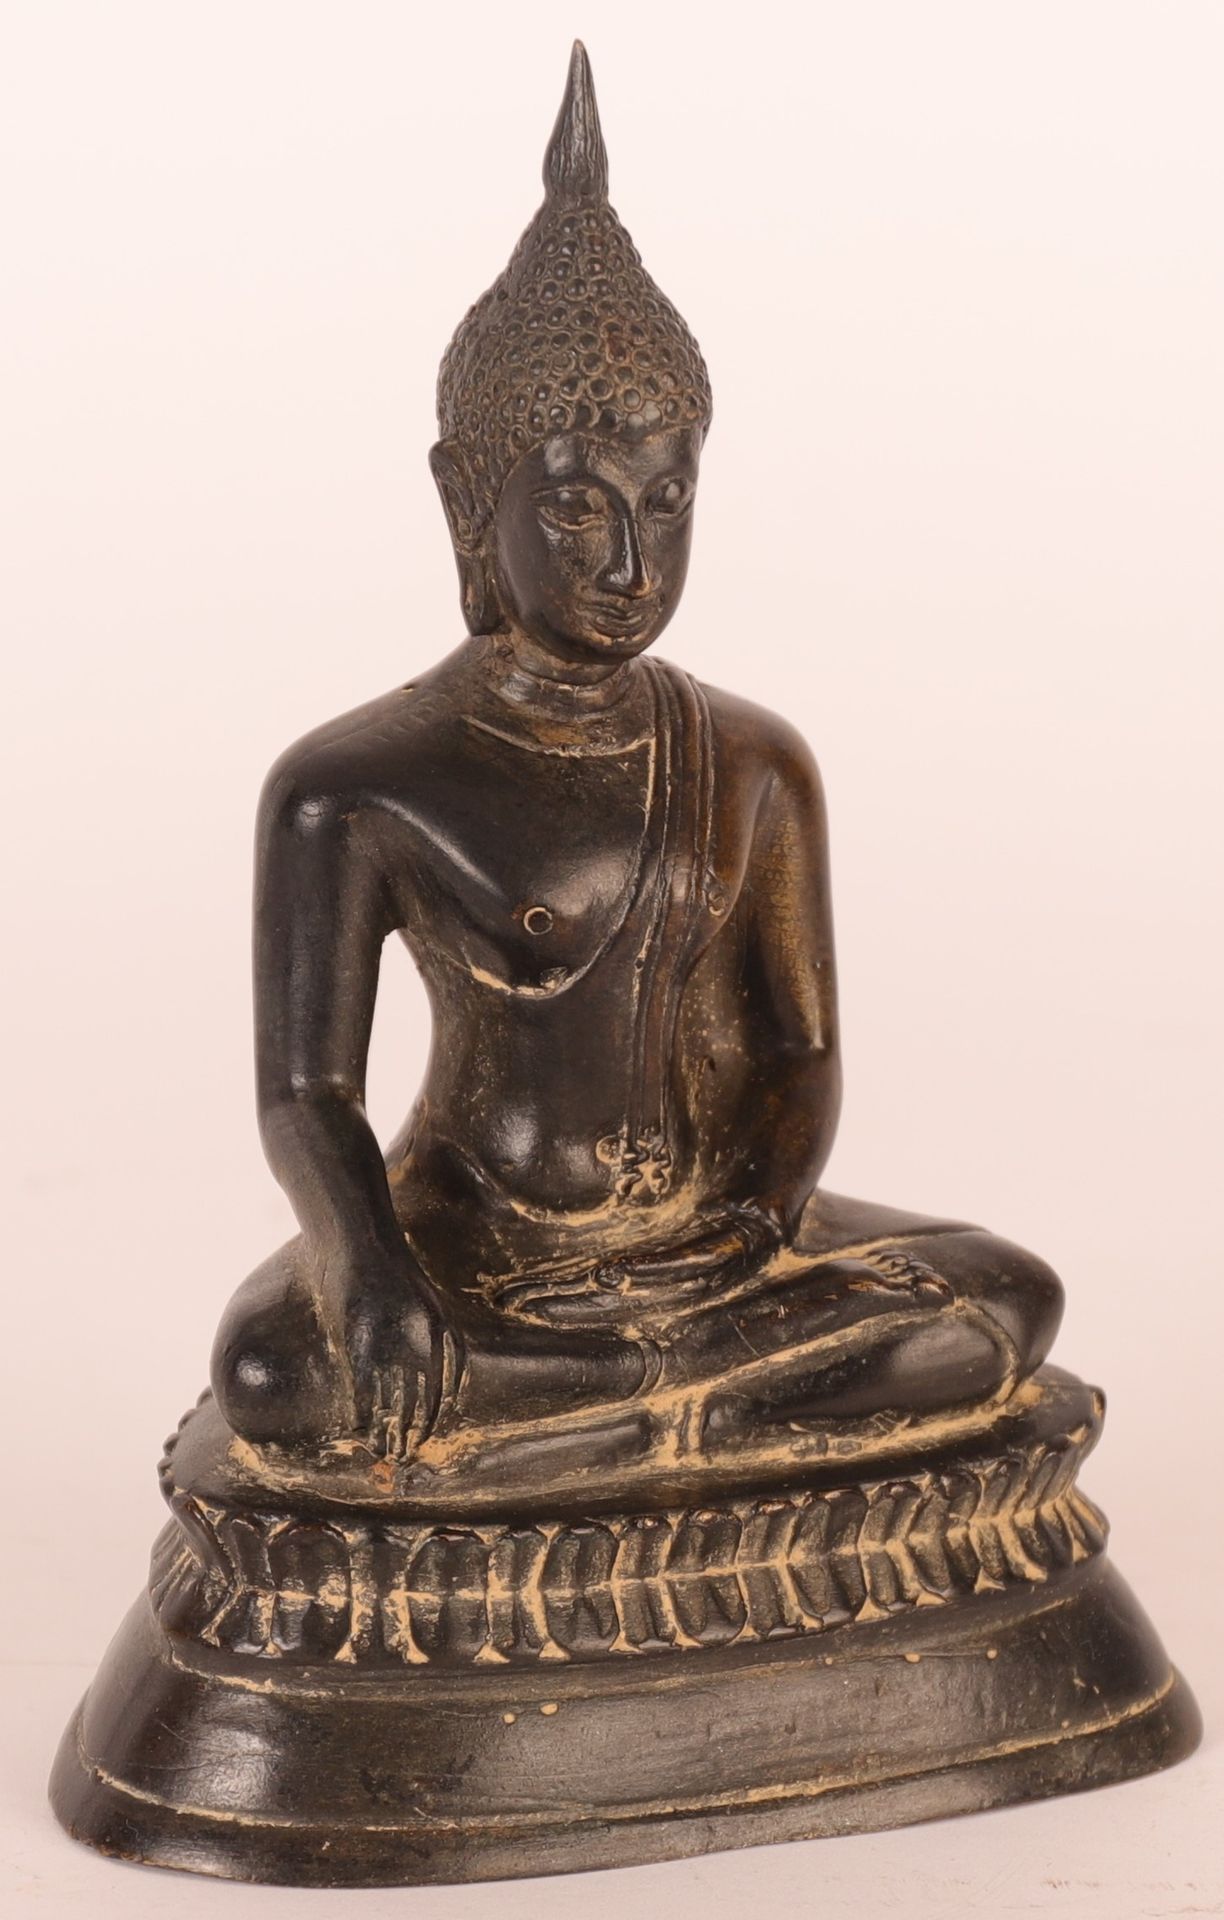 Null SEATED BUDDHA IN BRONZE
Bronze with brown patina
Southeast Asia, old work
H&hellip;